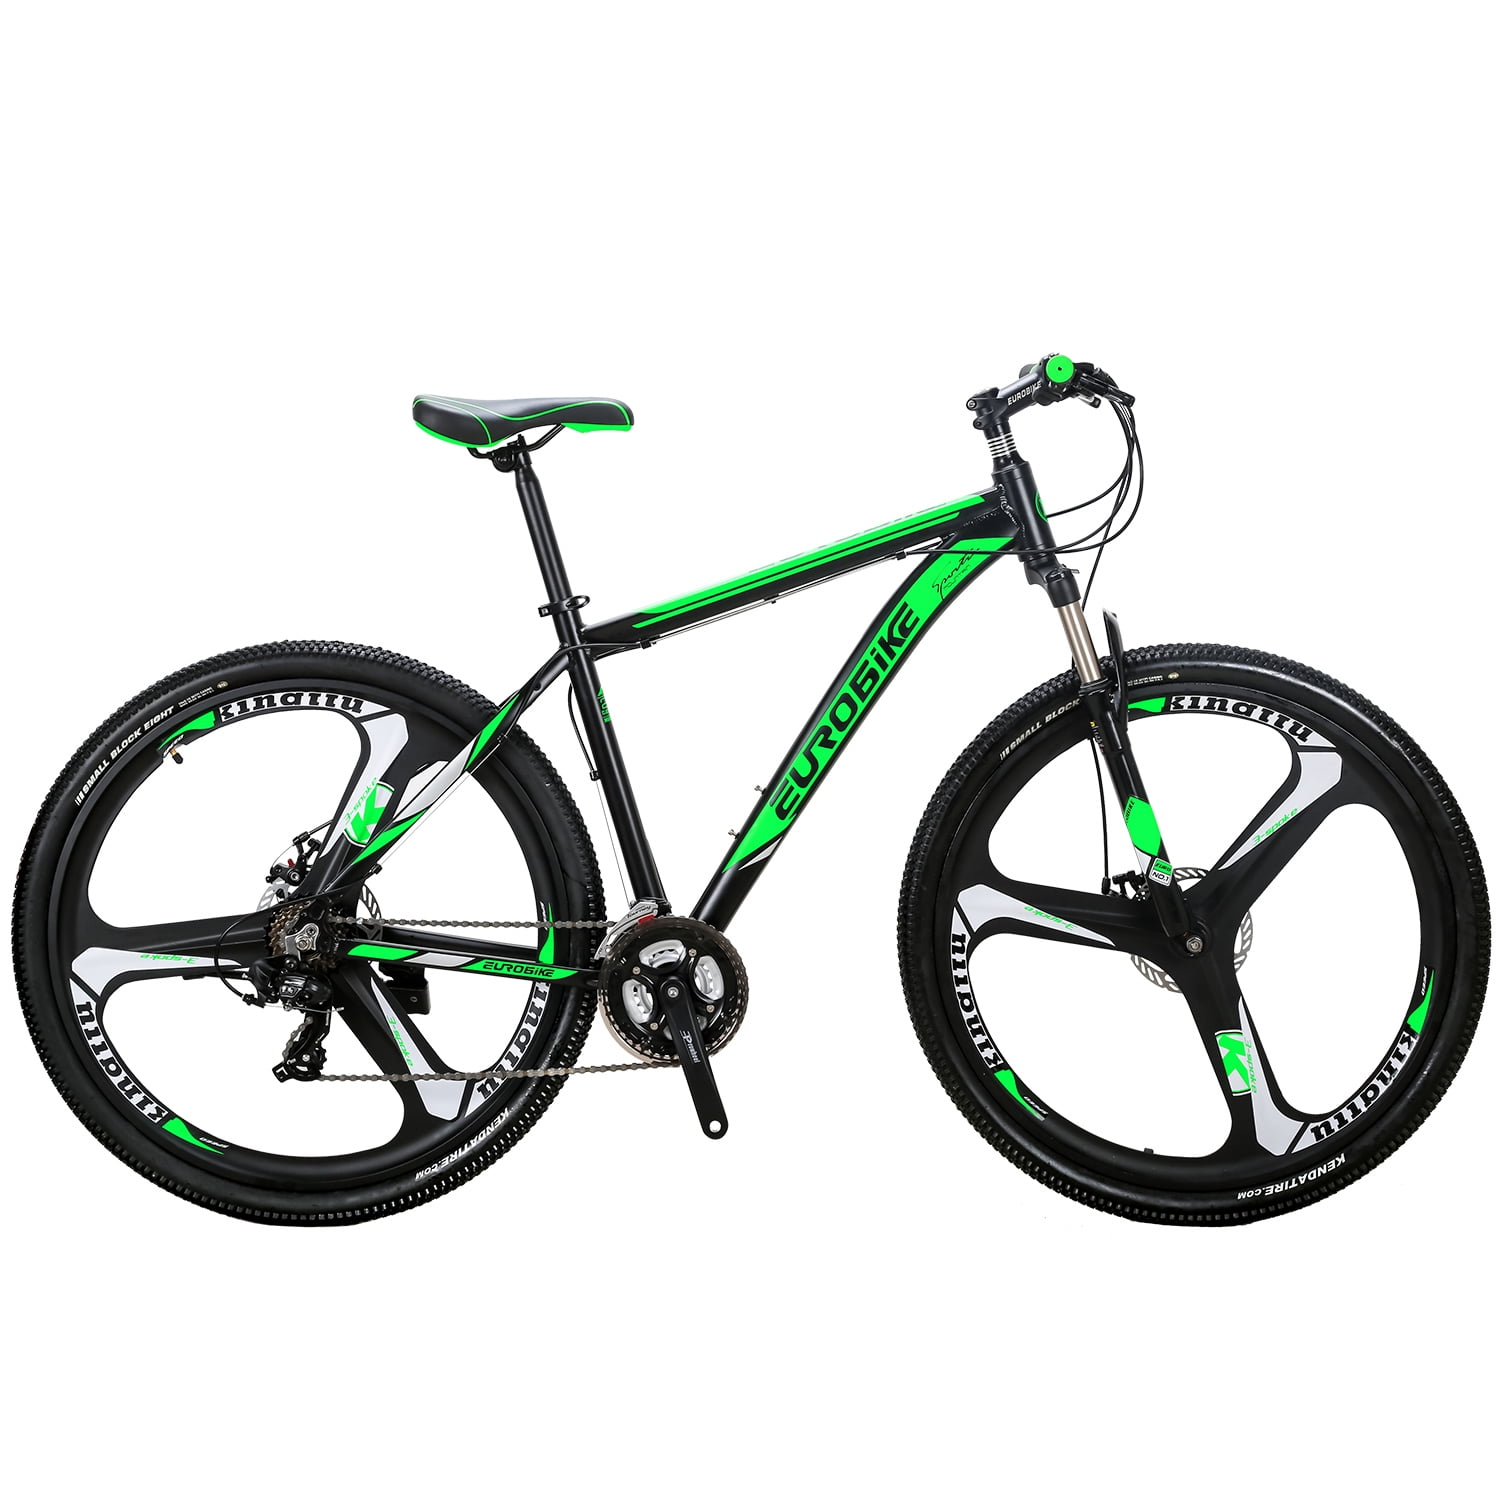 Eurobike Aluminum Frame Mountain Bike 21 Speed 29 inch Bicycle Disc Brakes for Men or Women Adults Green